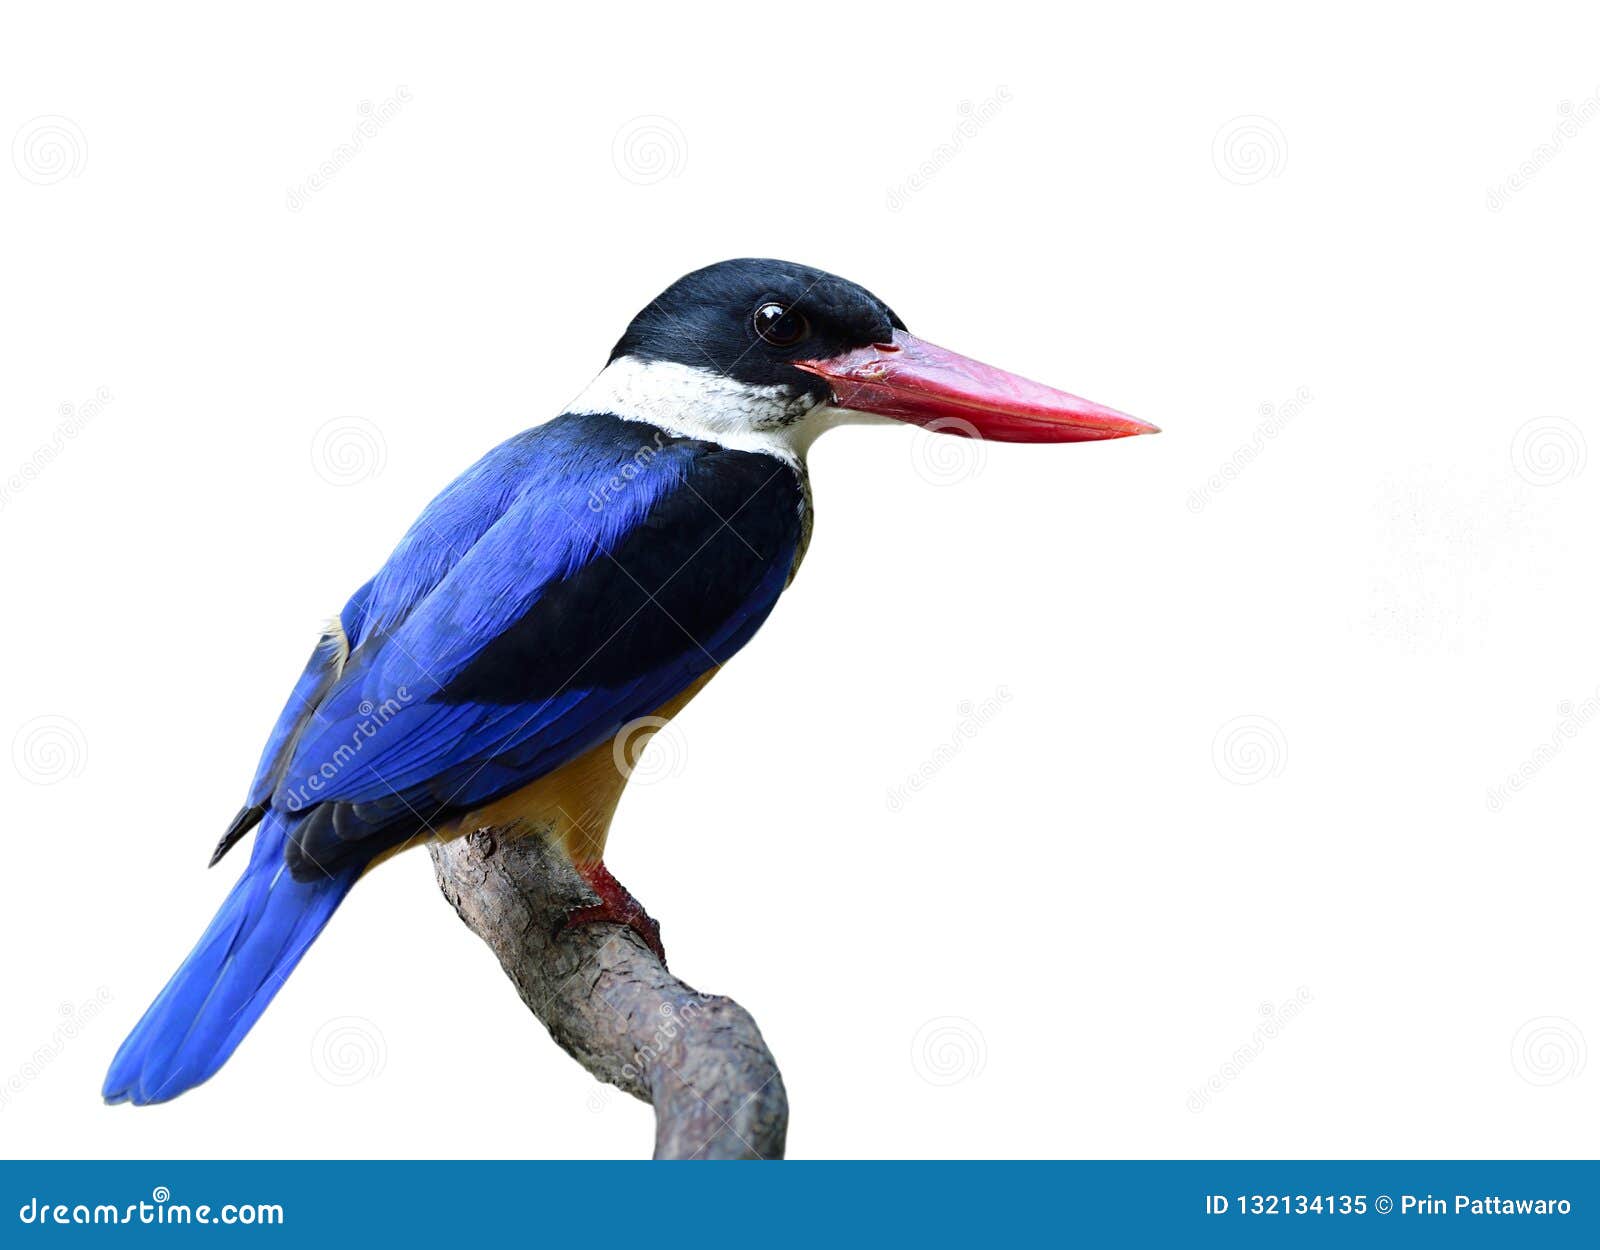 Beautiful Blue Bird with Black Head and Red Bills Perching on Wooden ...